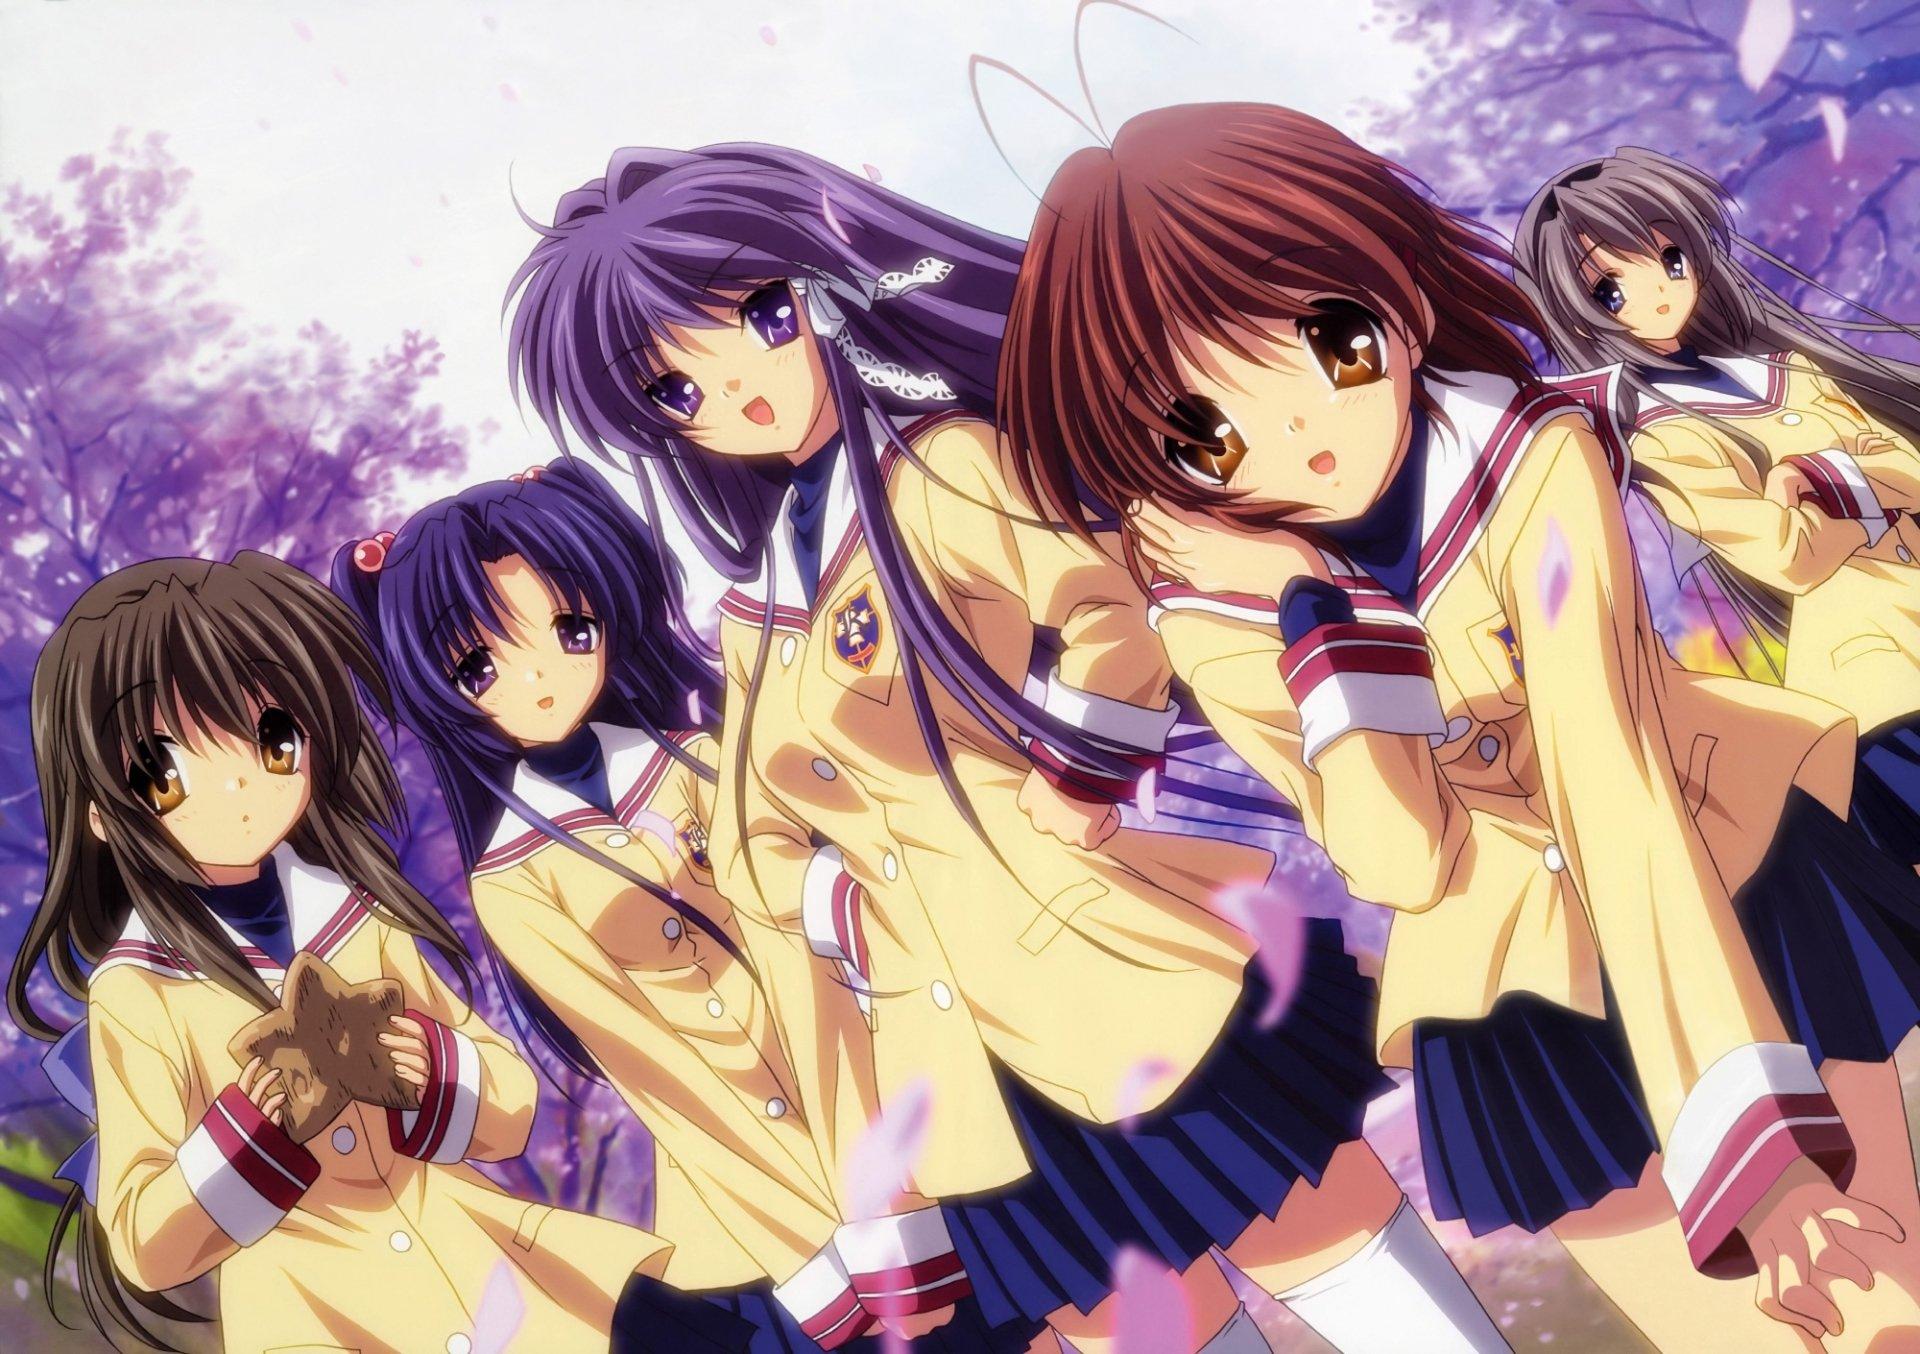 My Clannad wallpaper pack from r/animewallpapers (177 wallpapers